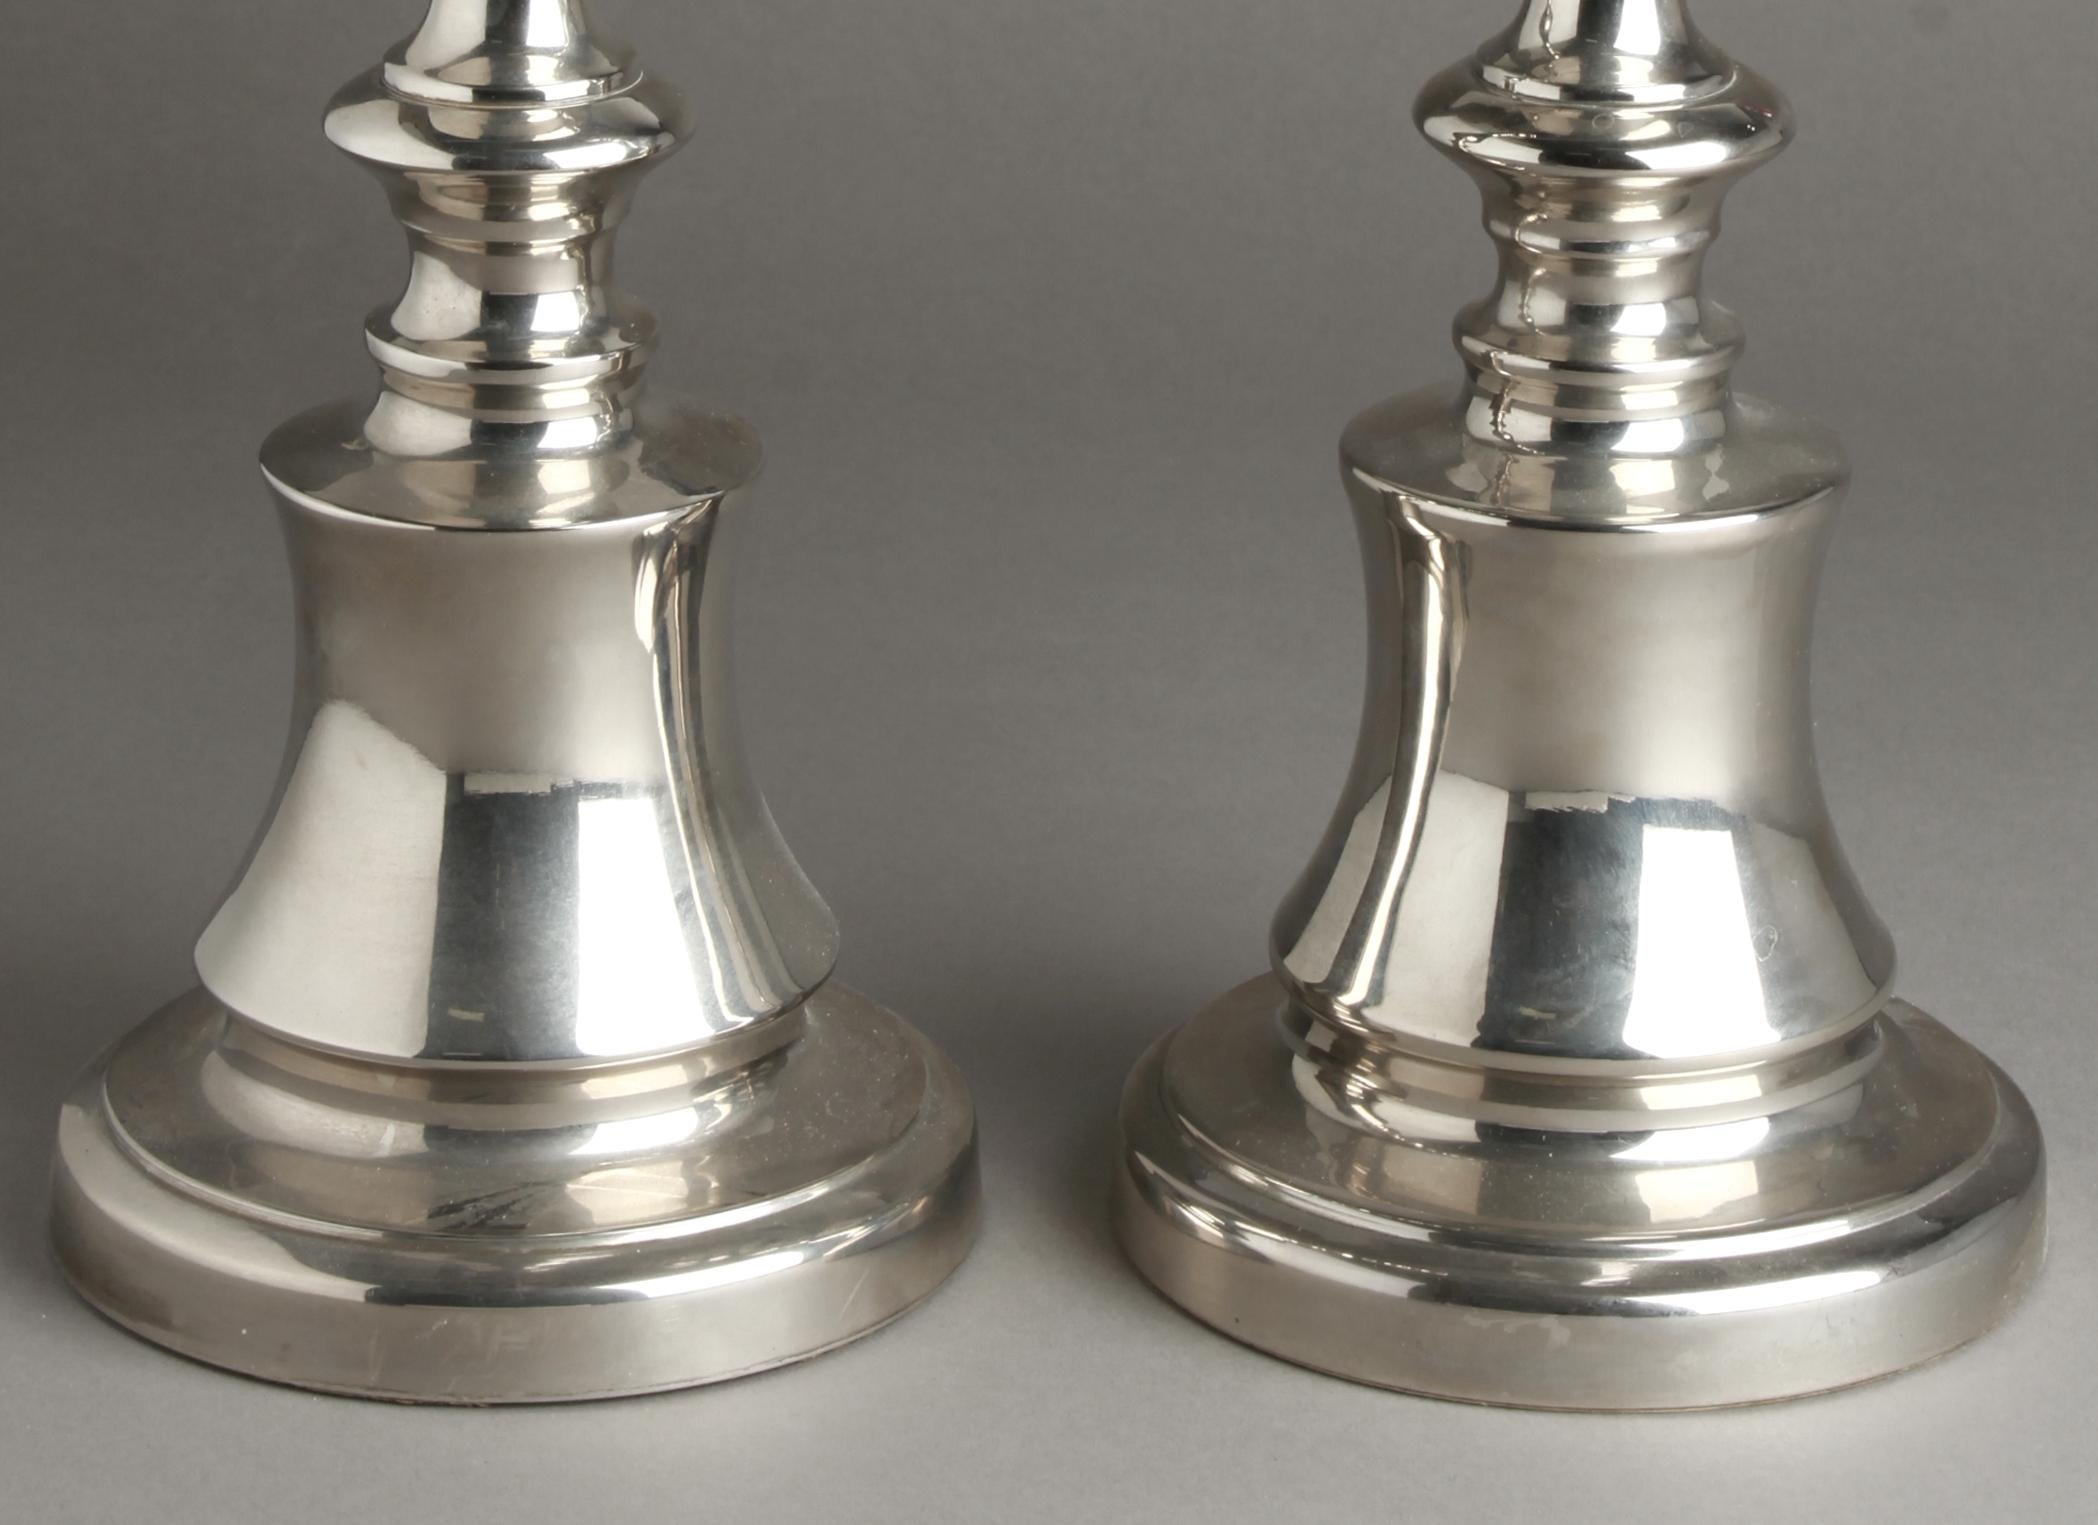 Pair of classical style silver tone candlesticks in cast aluminum. The pair is in great vintage condition with age-appropriate wear.